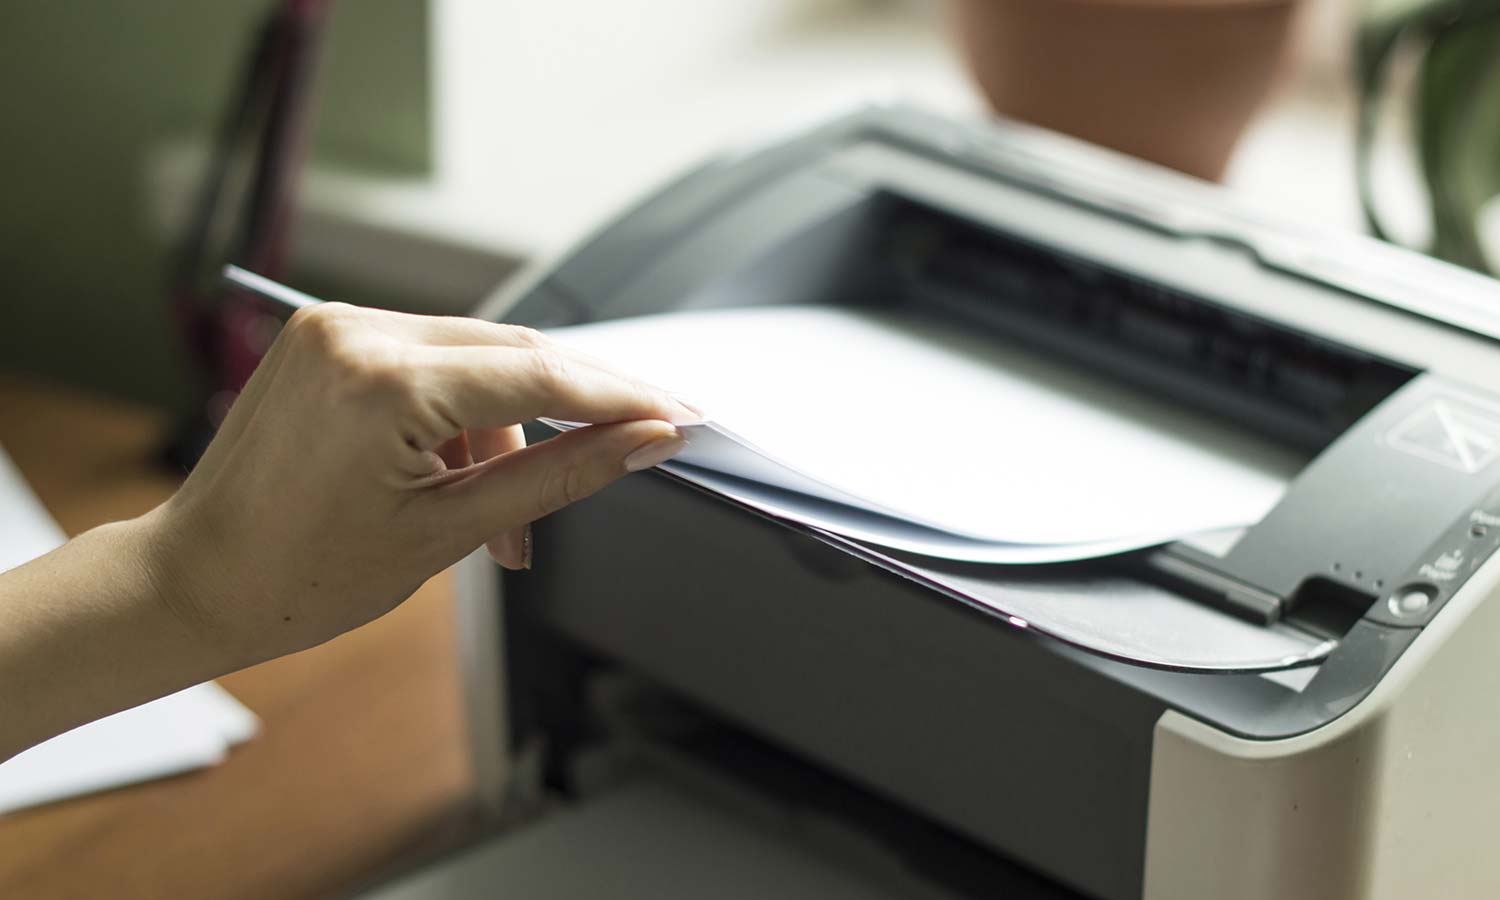 Do College Students Still Need to Buy Their Own Printer? | Tom's Guide